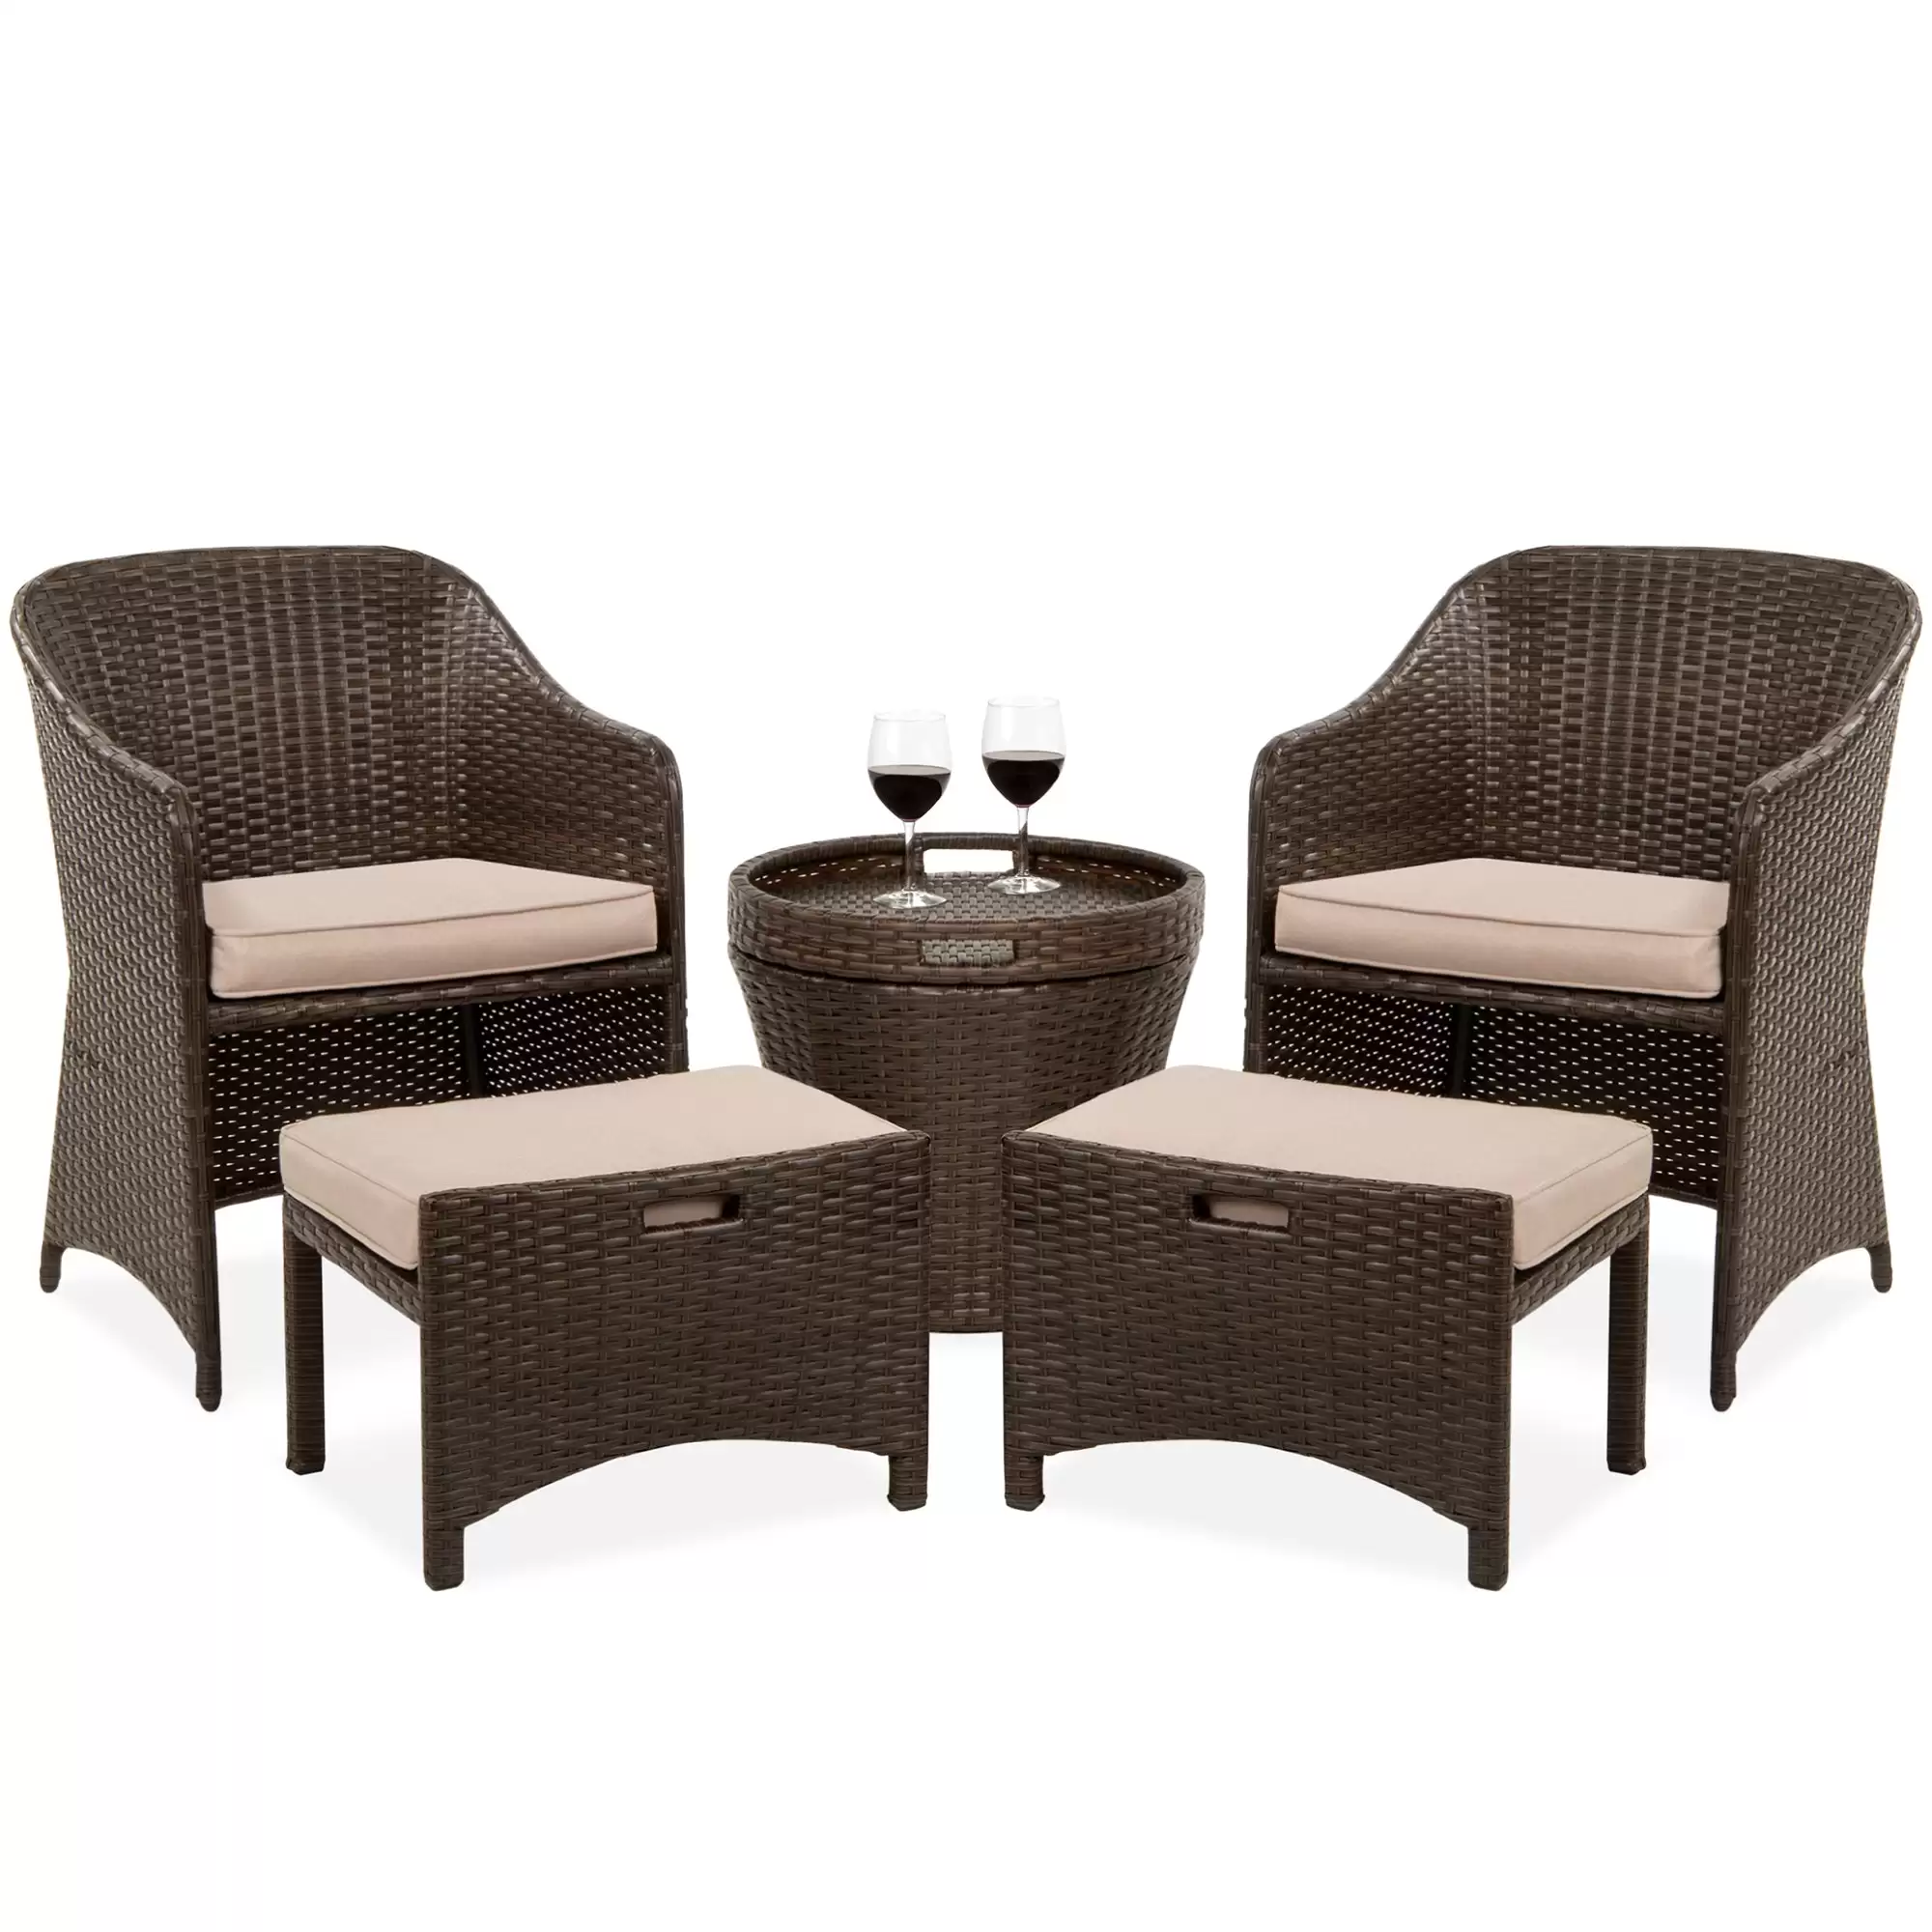 Order In Just $349.99 5-Piece Outdoor Wicker Bistro Set W/ Side Storage Table At Bestchoiceproducts